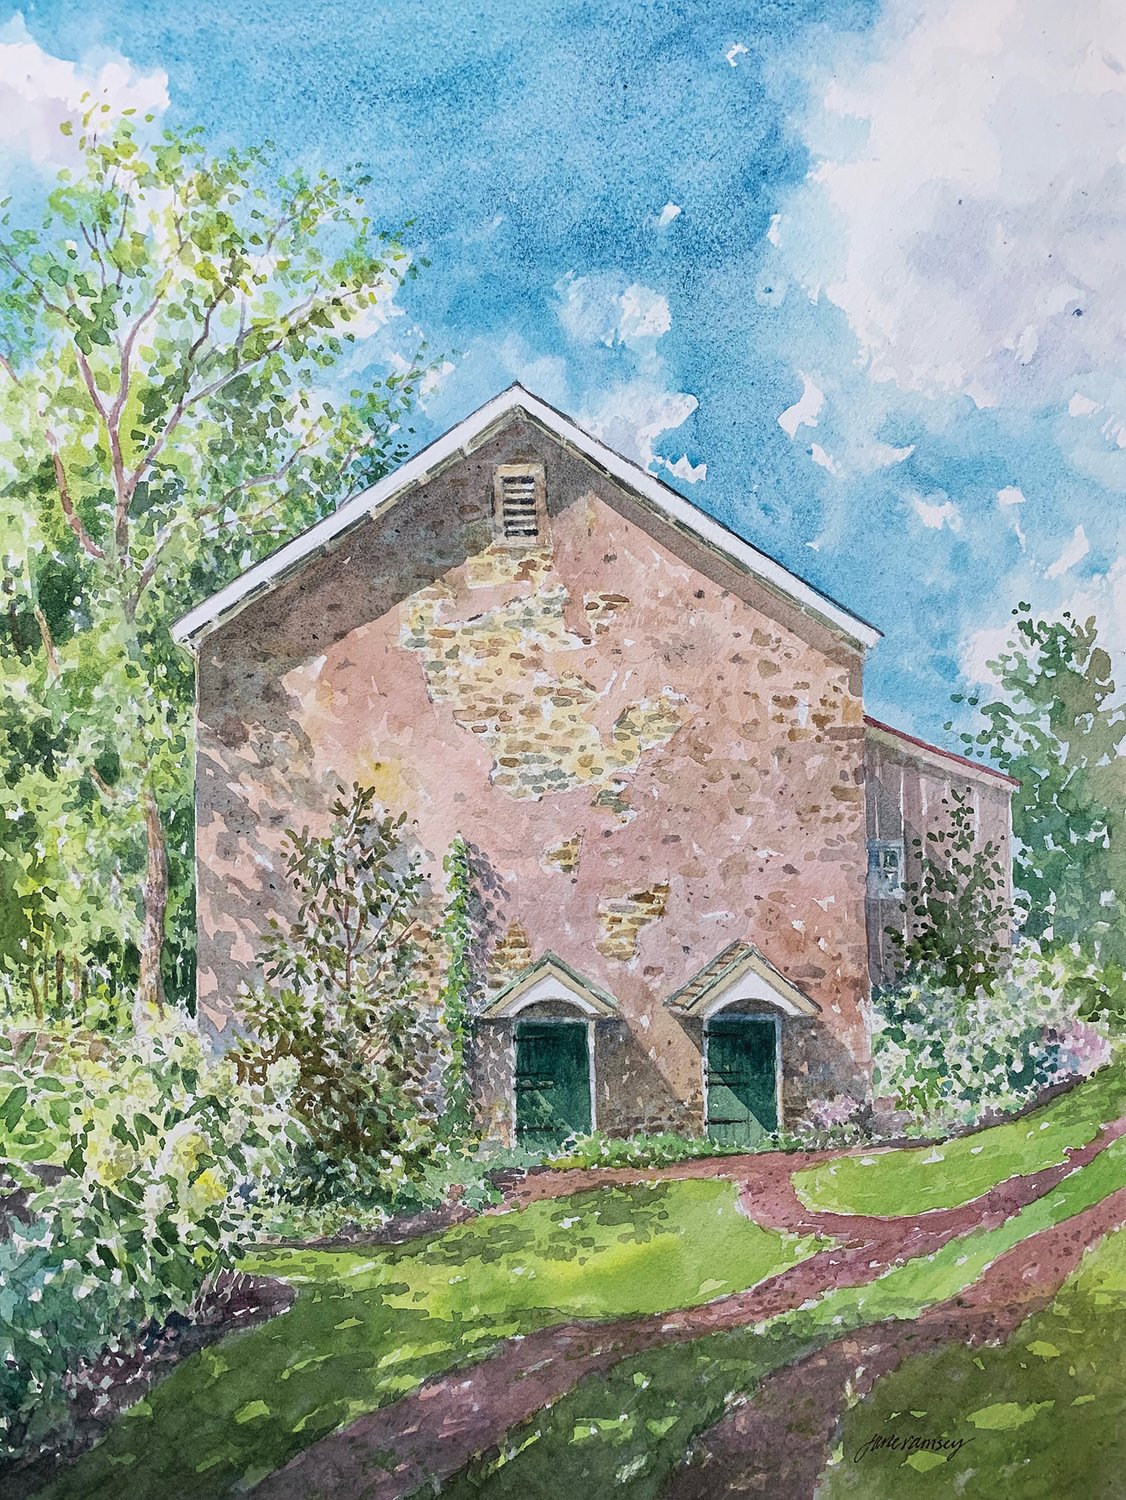 “Art of the Barn 2019” is by Jane Ramsey.